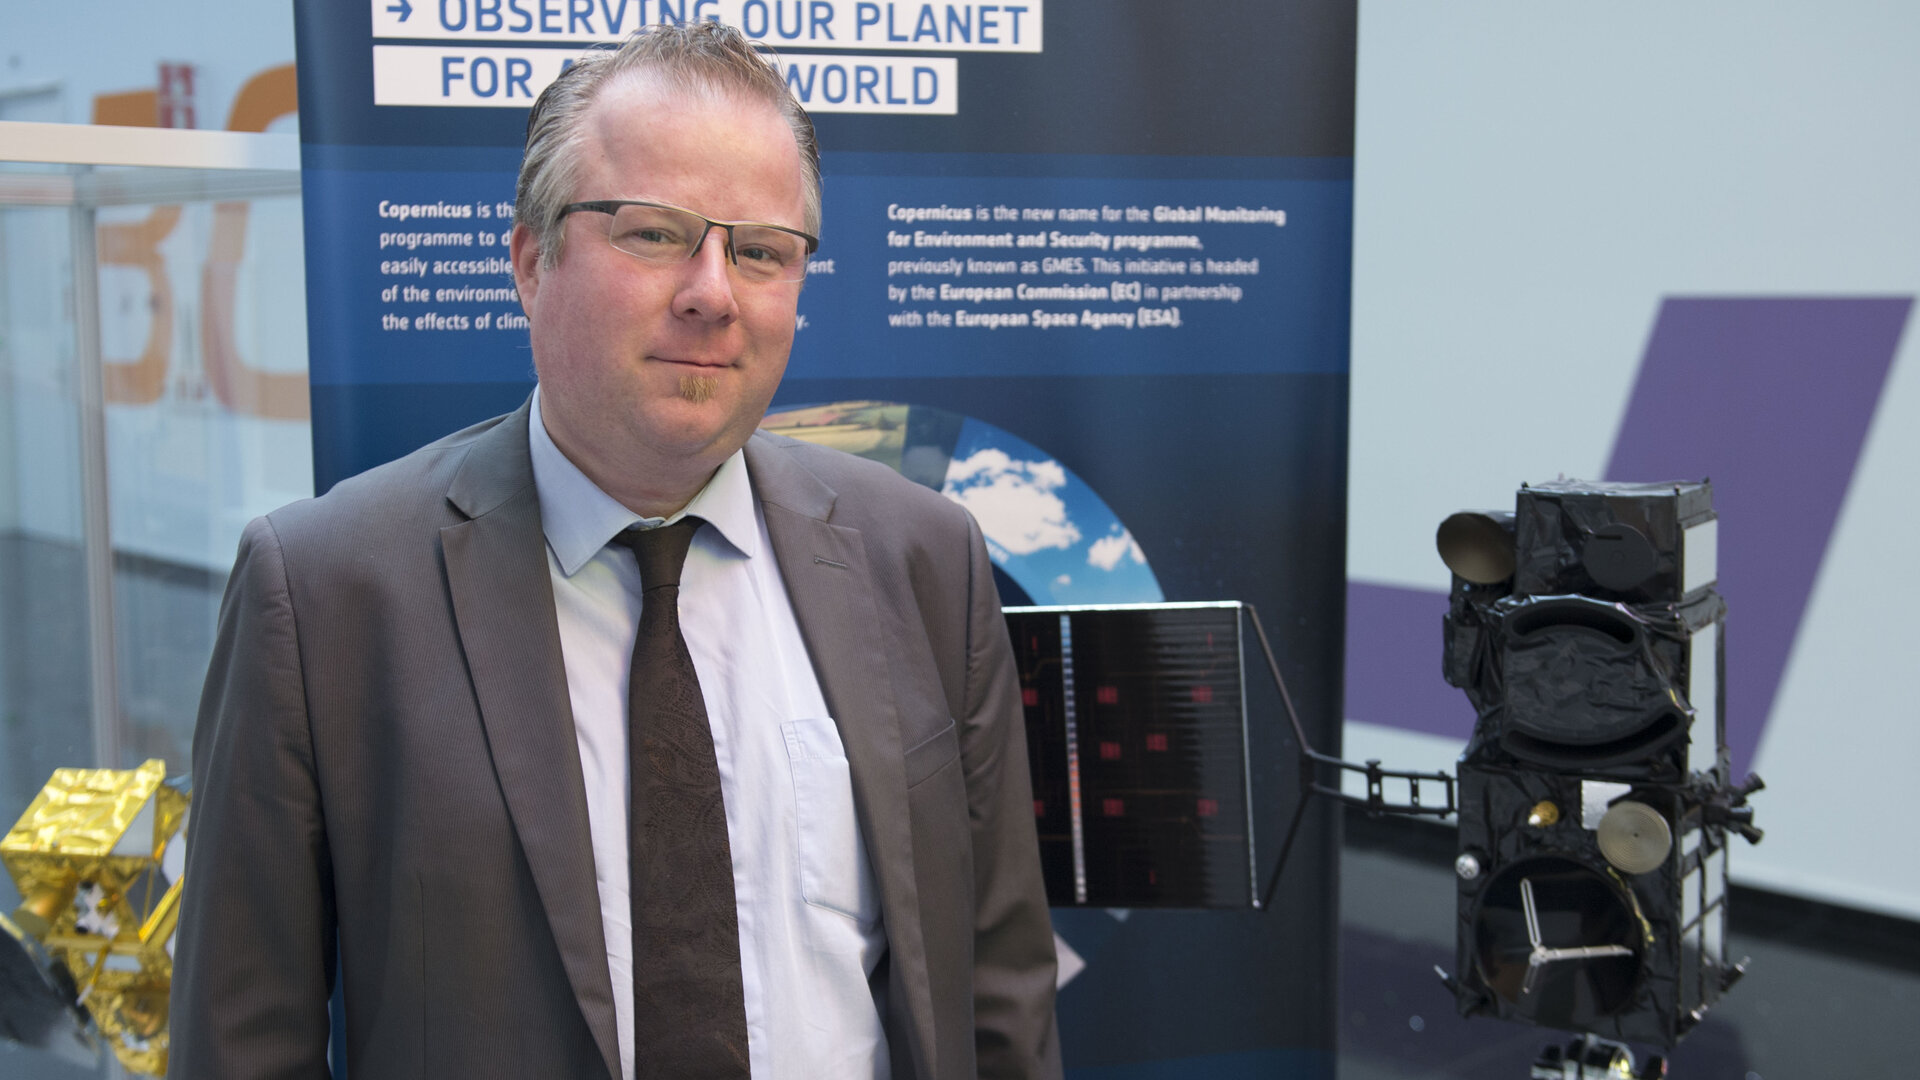 Jean-François Flamand: Sentinel-3 Product Assurance and Safety Manager 